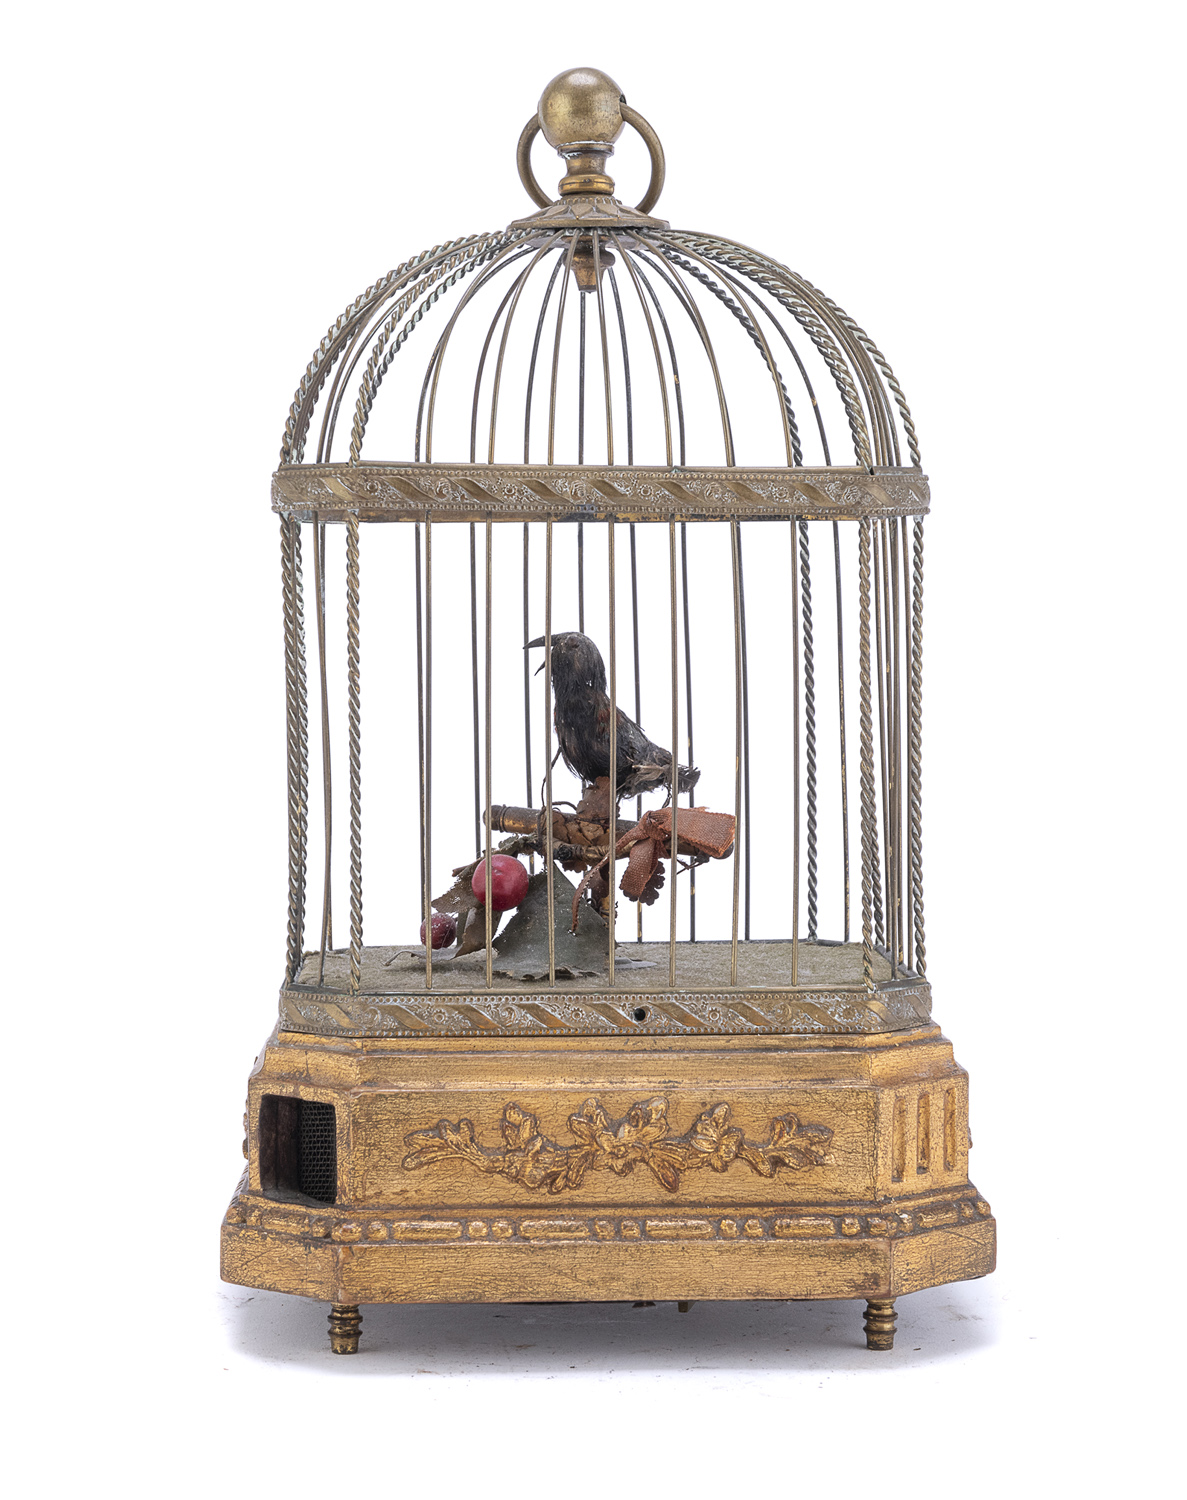 AUTOMA OF BIRD WITH CAGE 19TH CENTURY